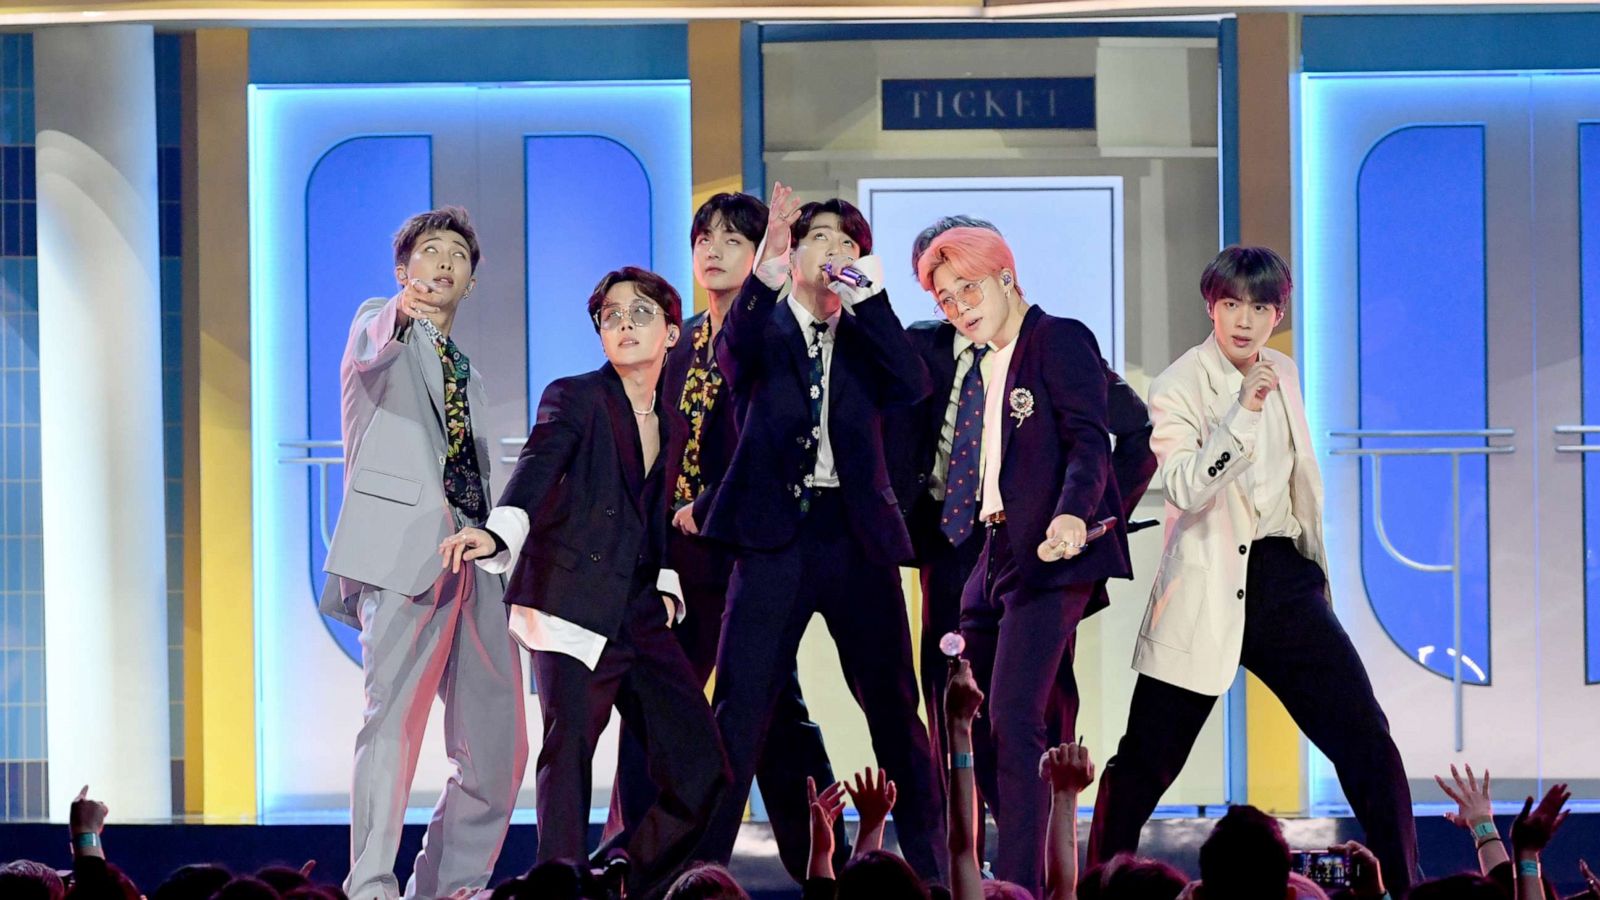 BTS inducted into 2022 Guinness World Records 'Hall of Fame